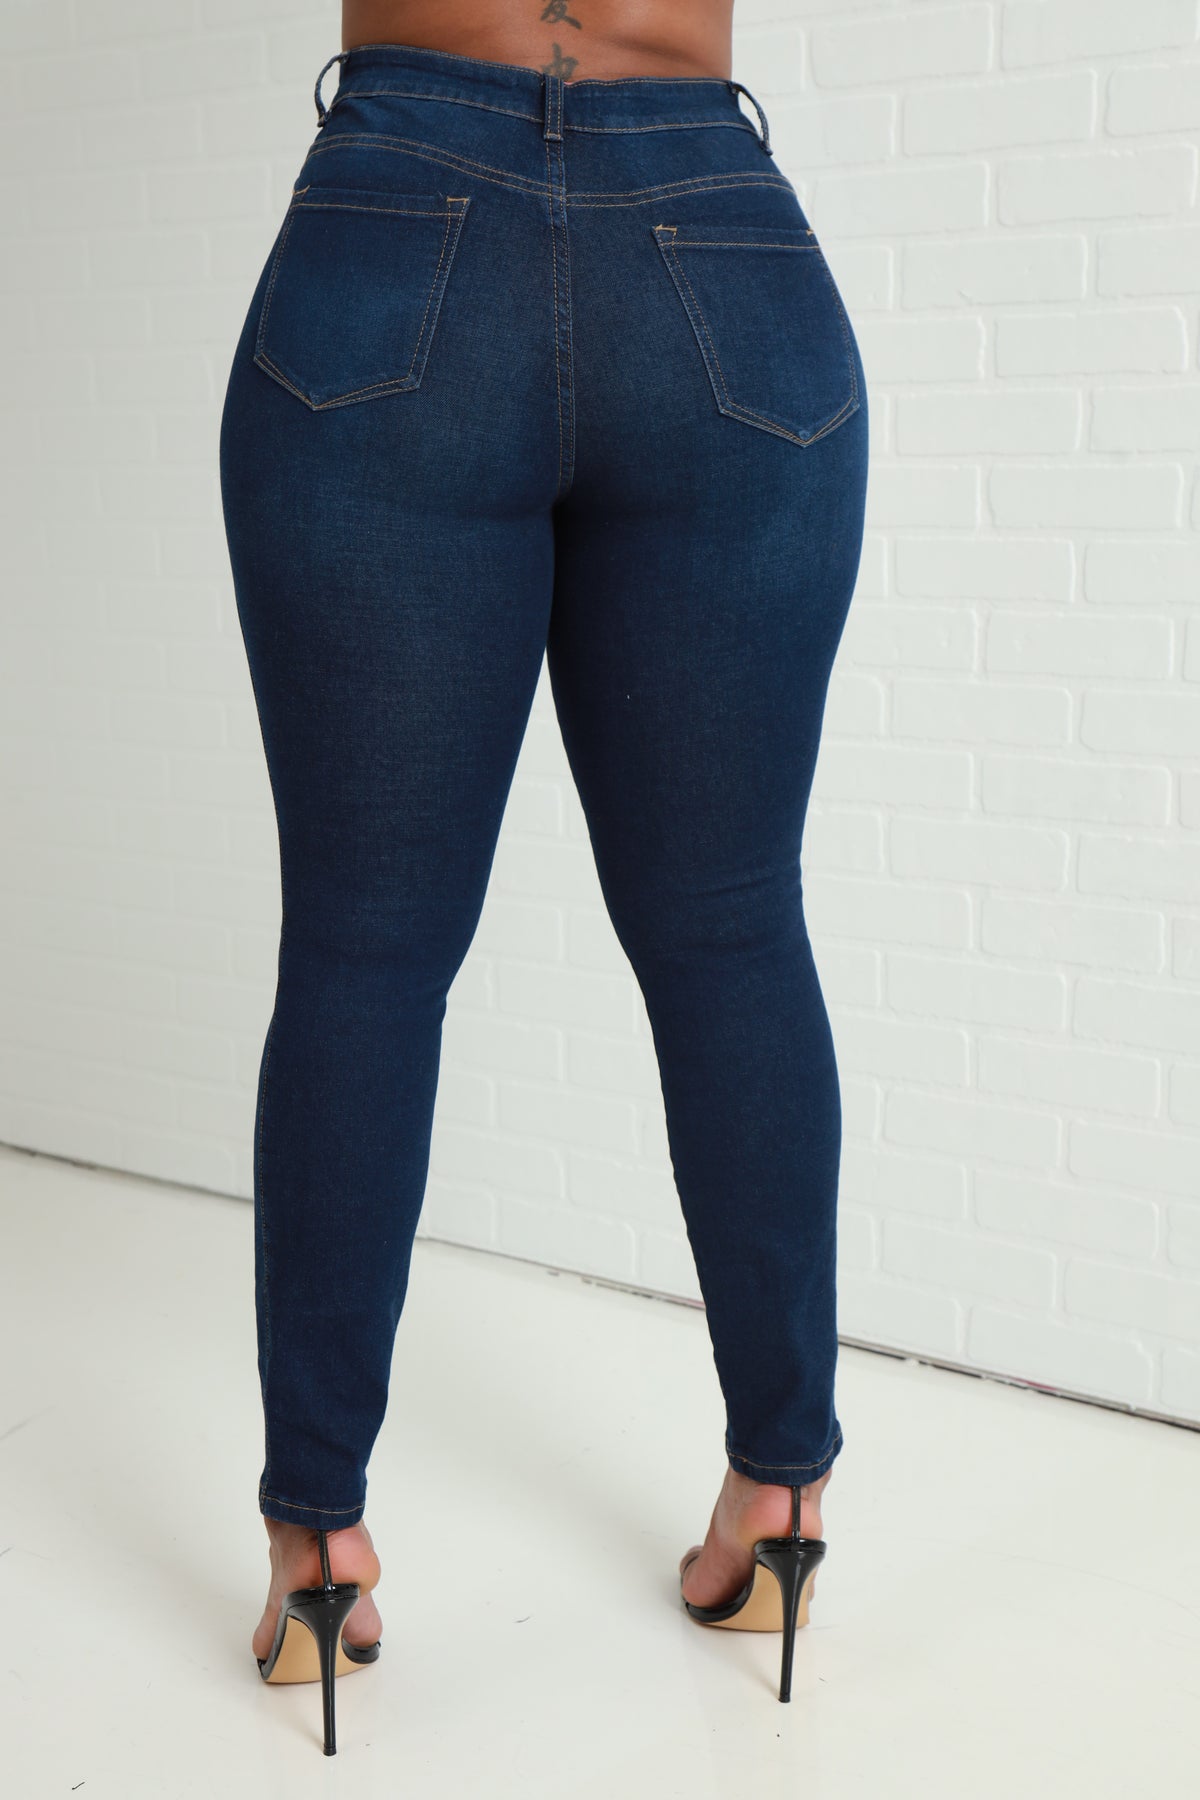 
              Been Awhile Hourglass High Rise Stretchy Jeans - Dark Wash - Swank A Posh
            